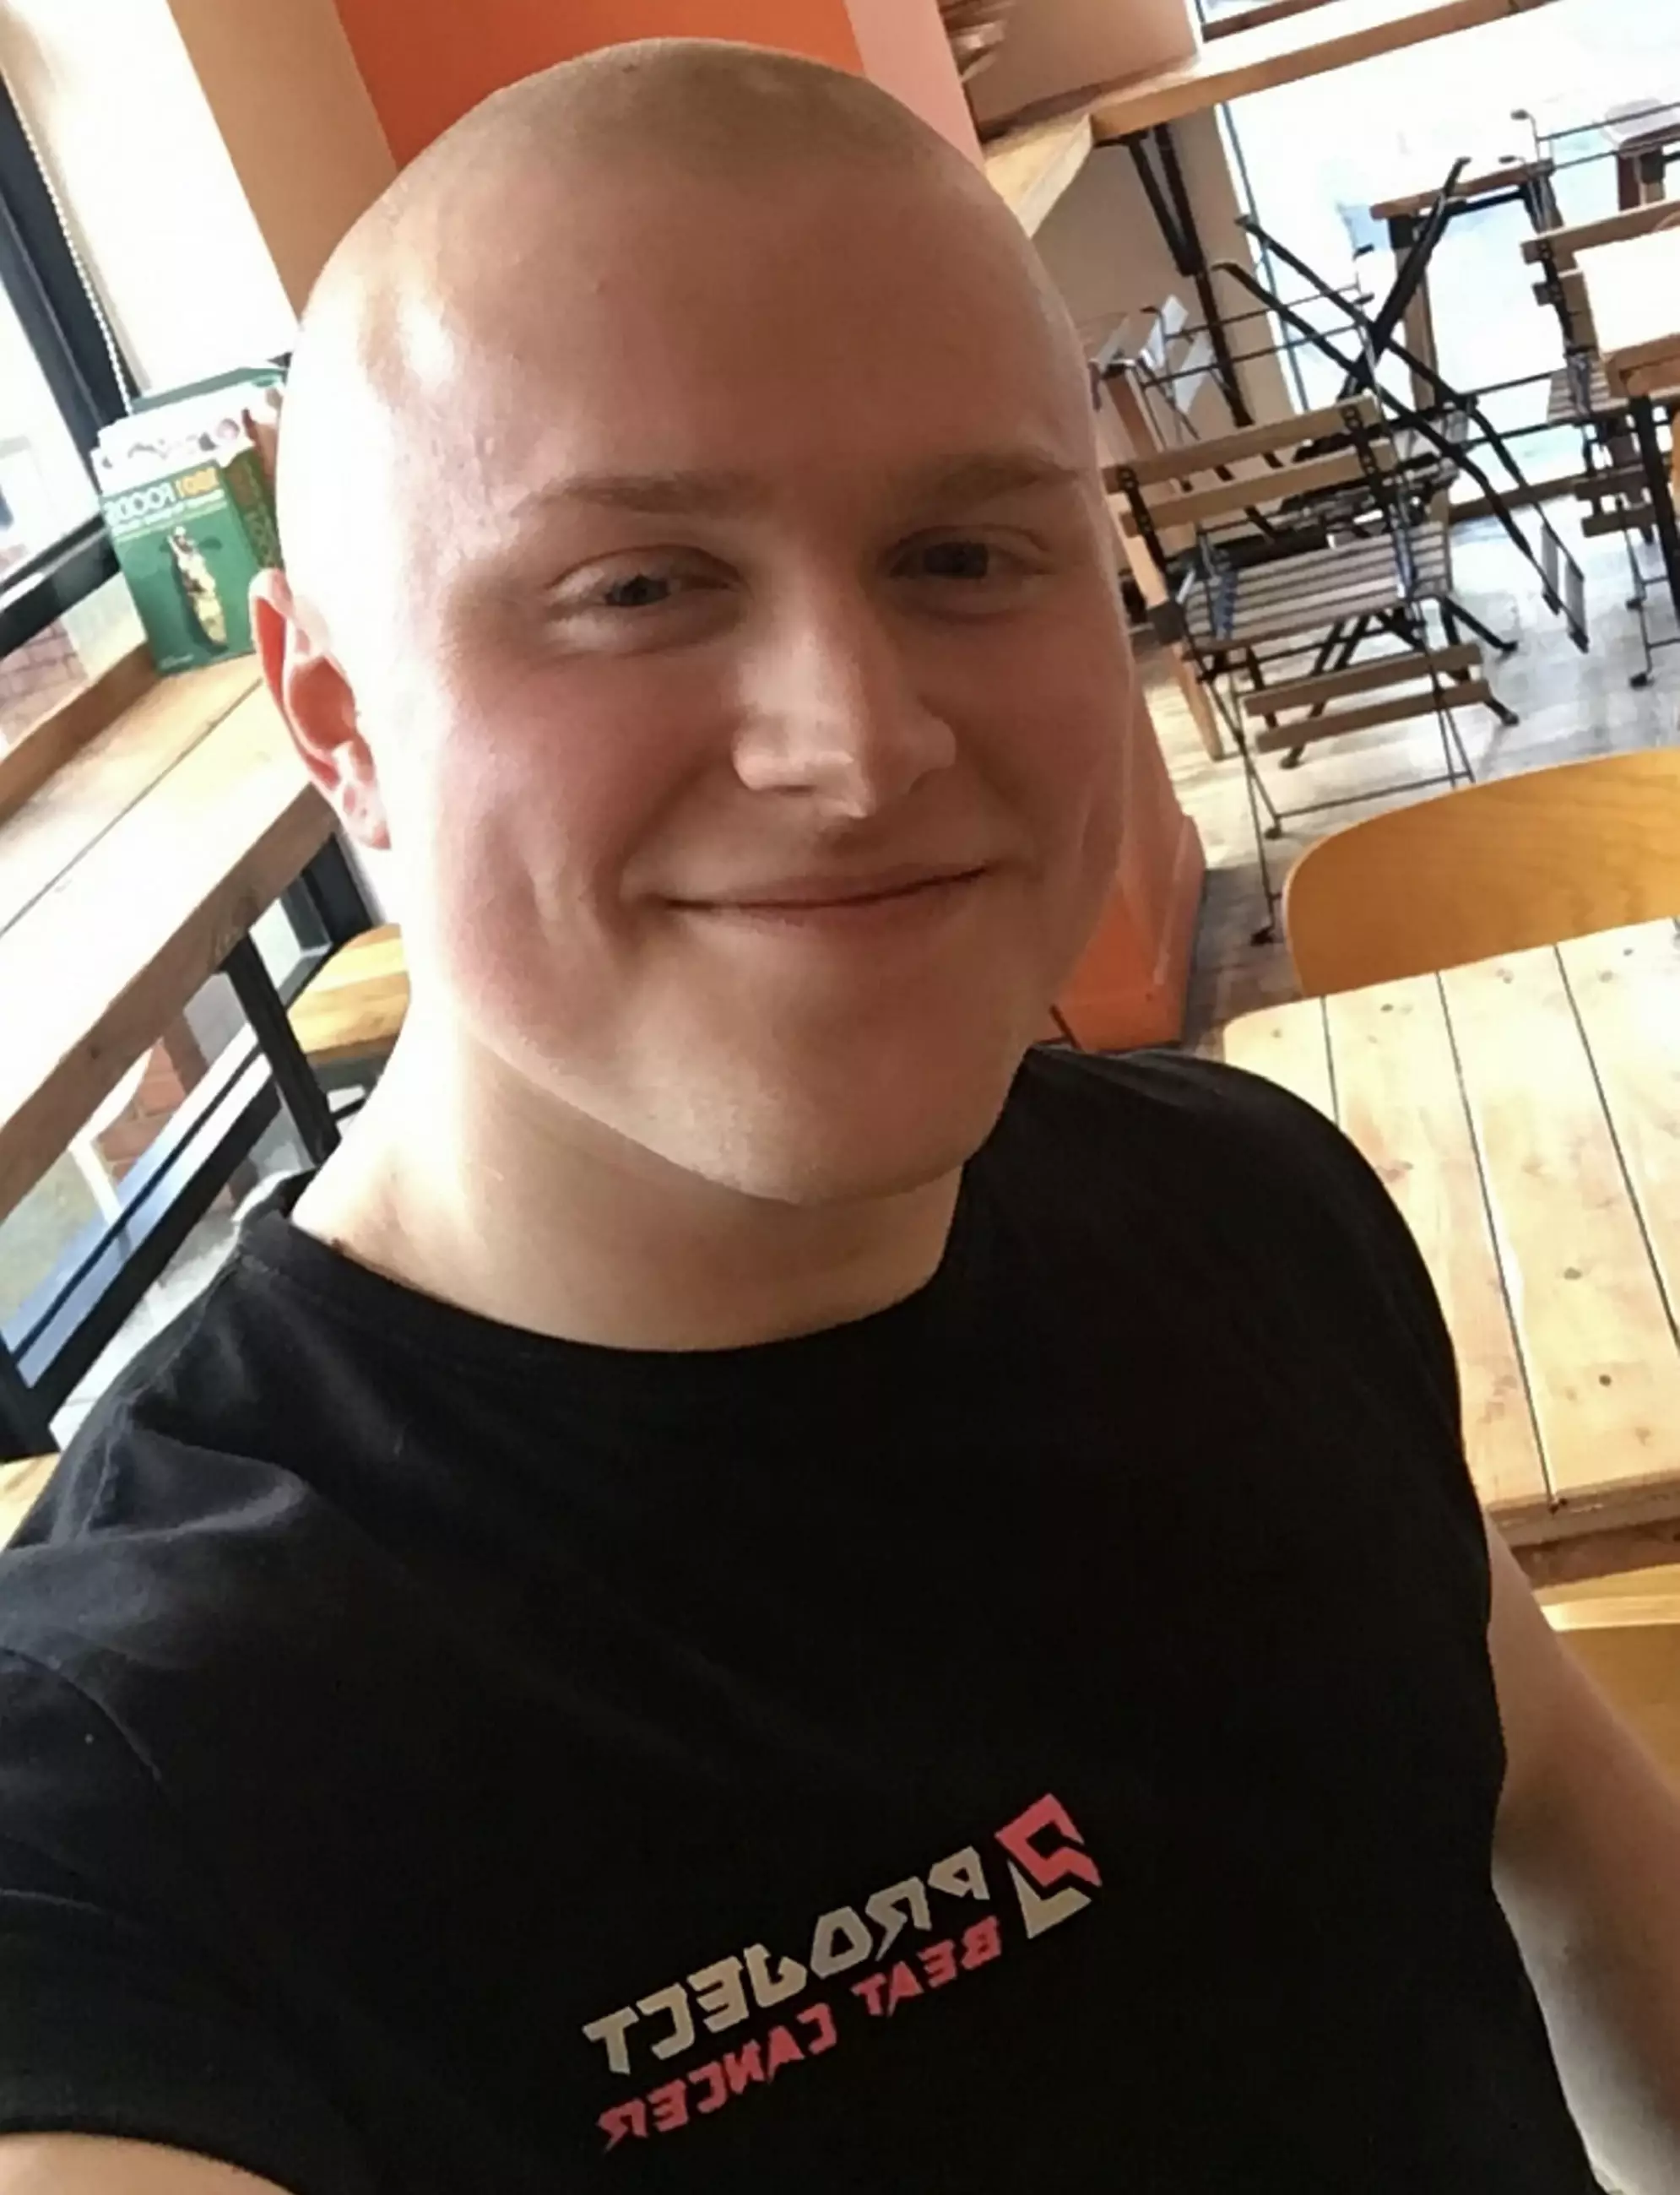 Ollie even shaved his head to raise money for cancer.